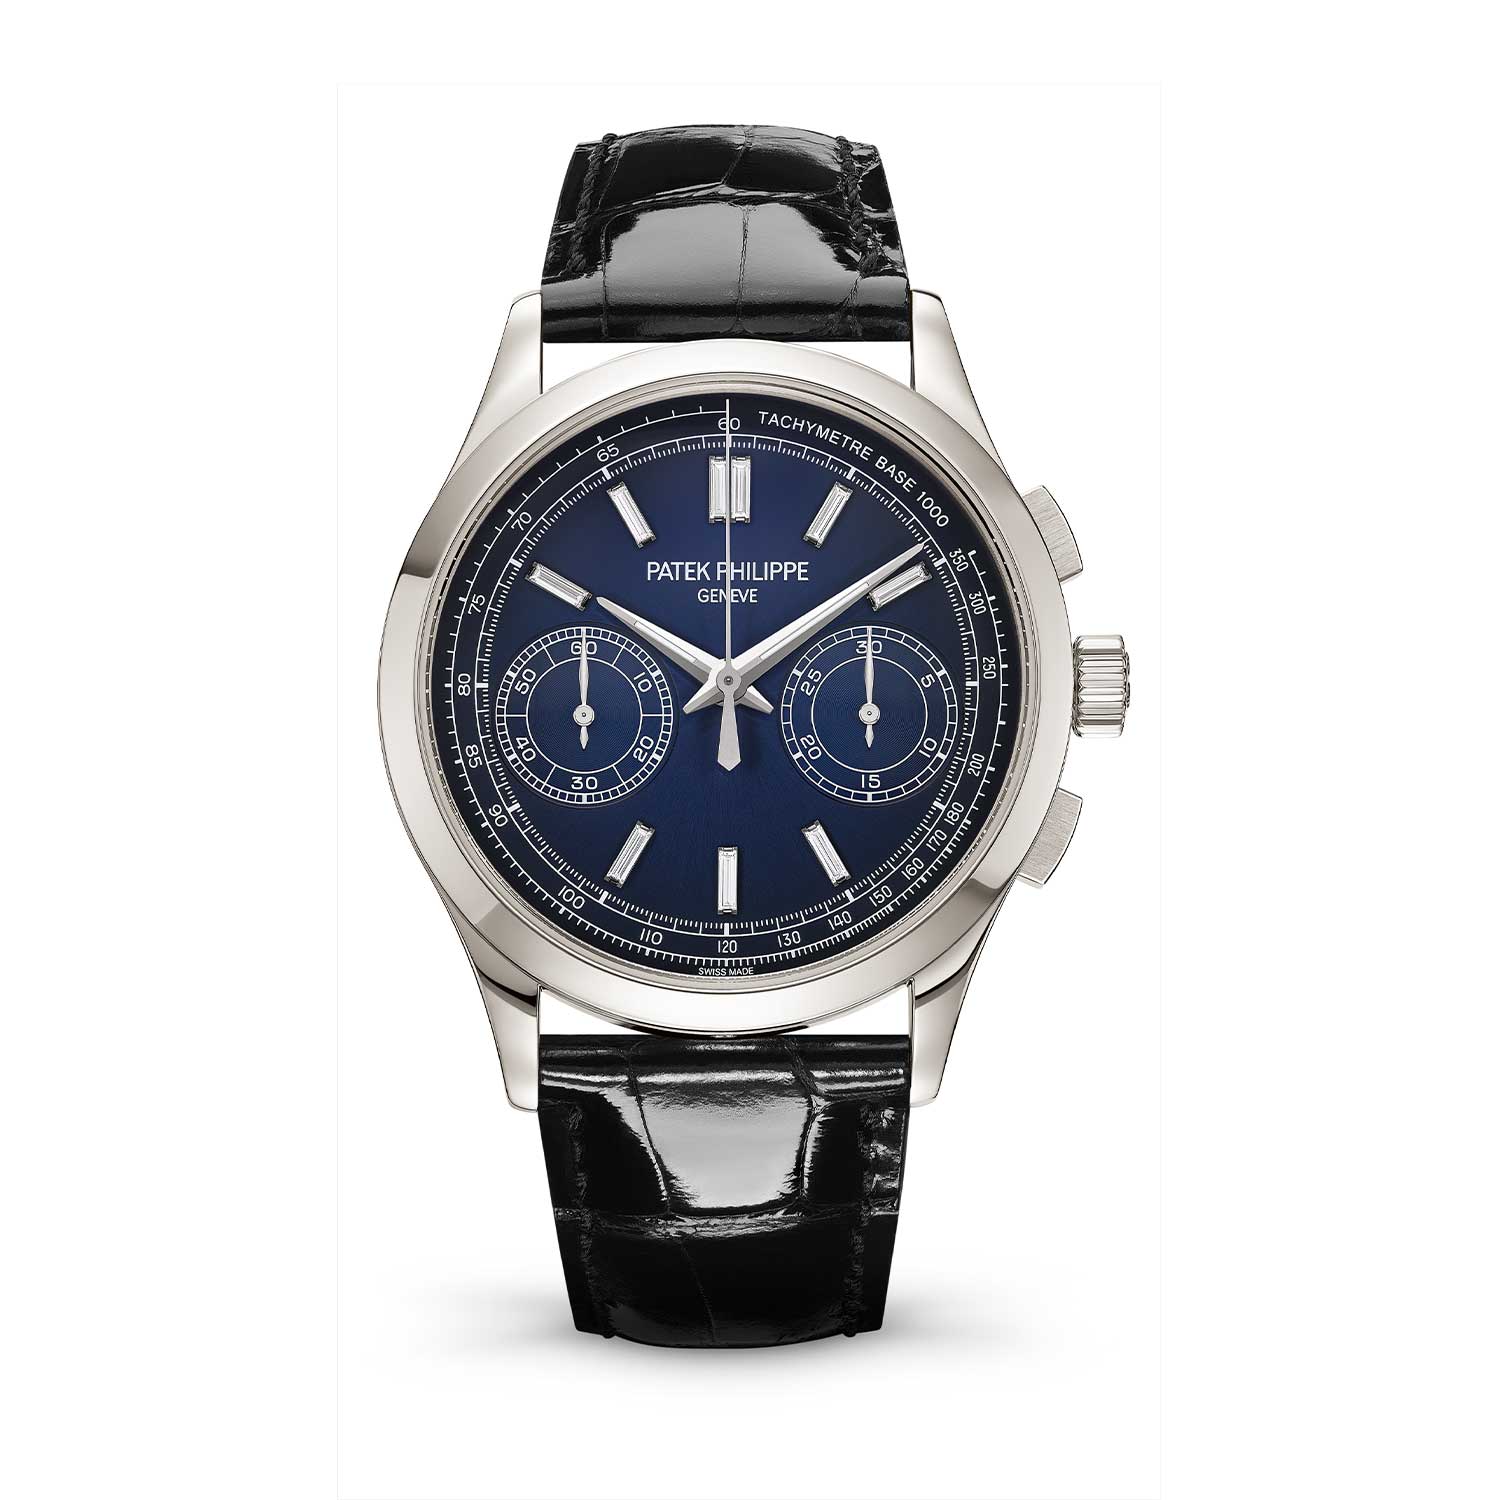 In 2017, Patek Philippe launched the Ref. 5170P-001, the concluding generation of the reference in platinum with a blue dégradé dial featuring diamond baton markers and a tachymeter scale